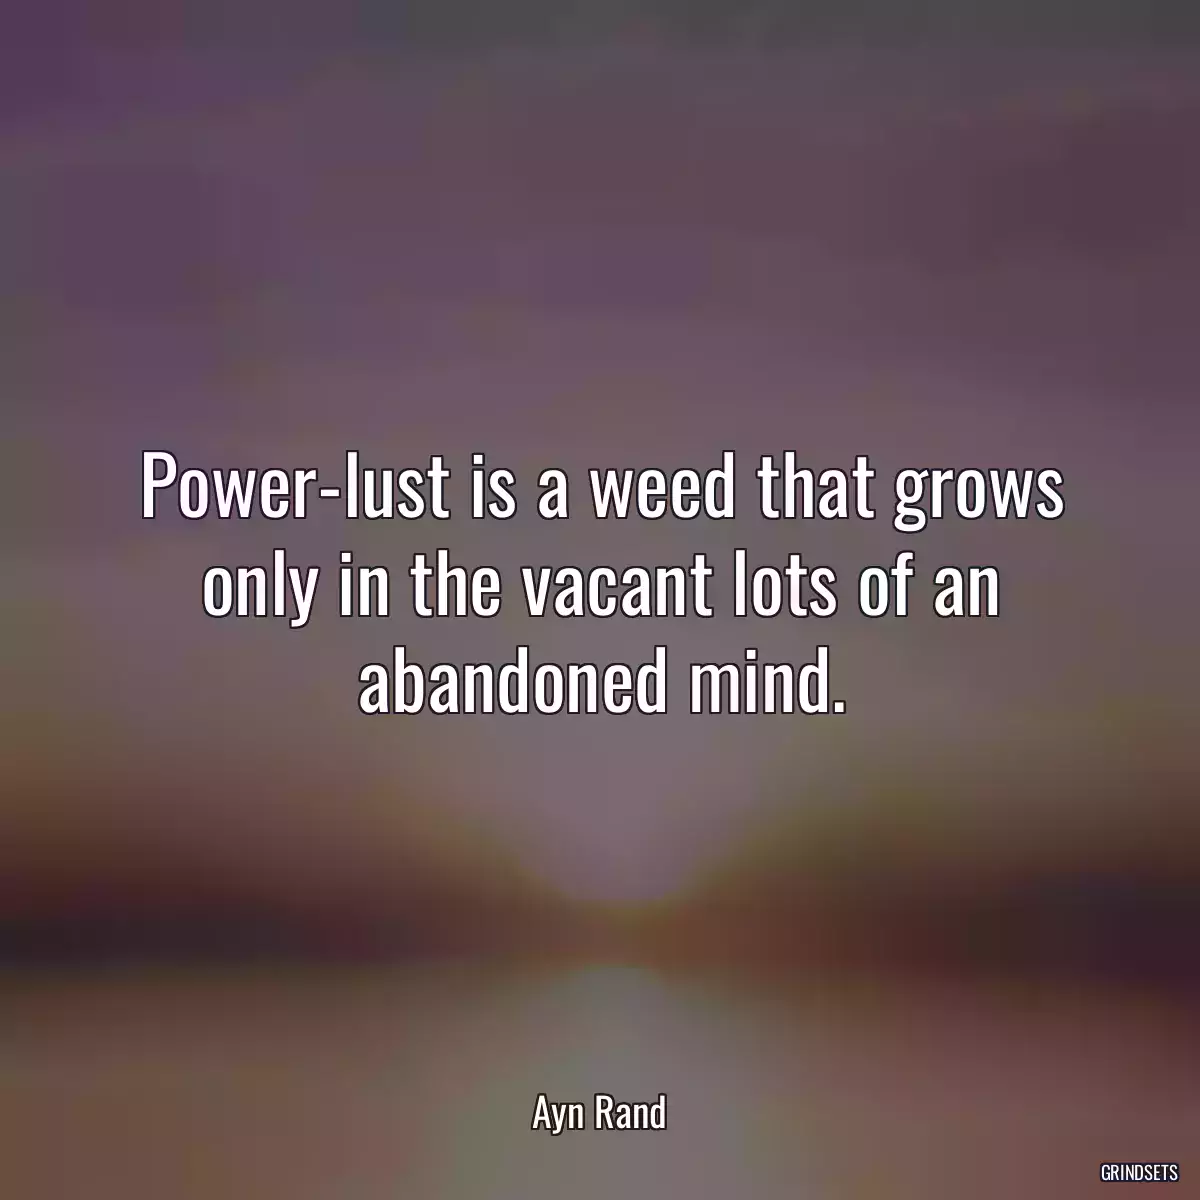 Power-lust is a weed that grows only in the vacant lots of an abandoned mind.